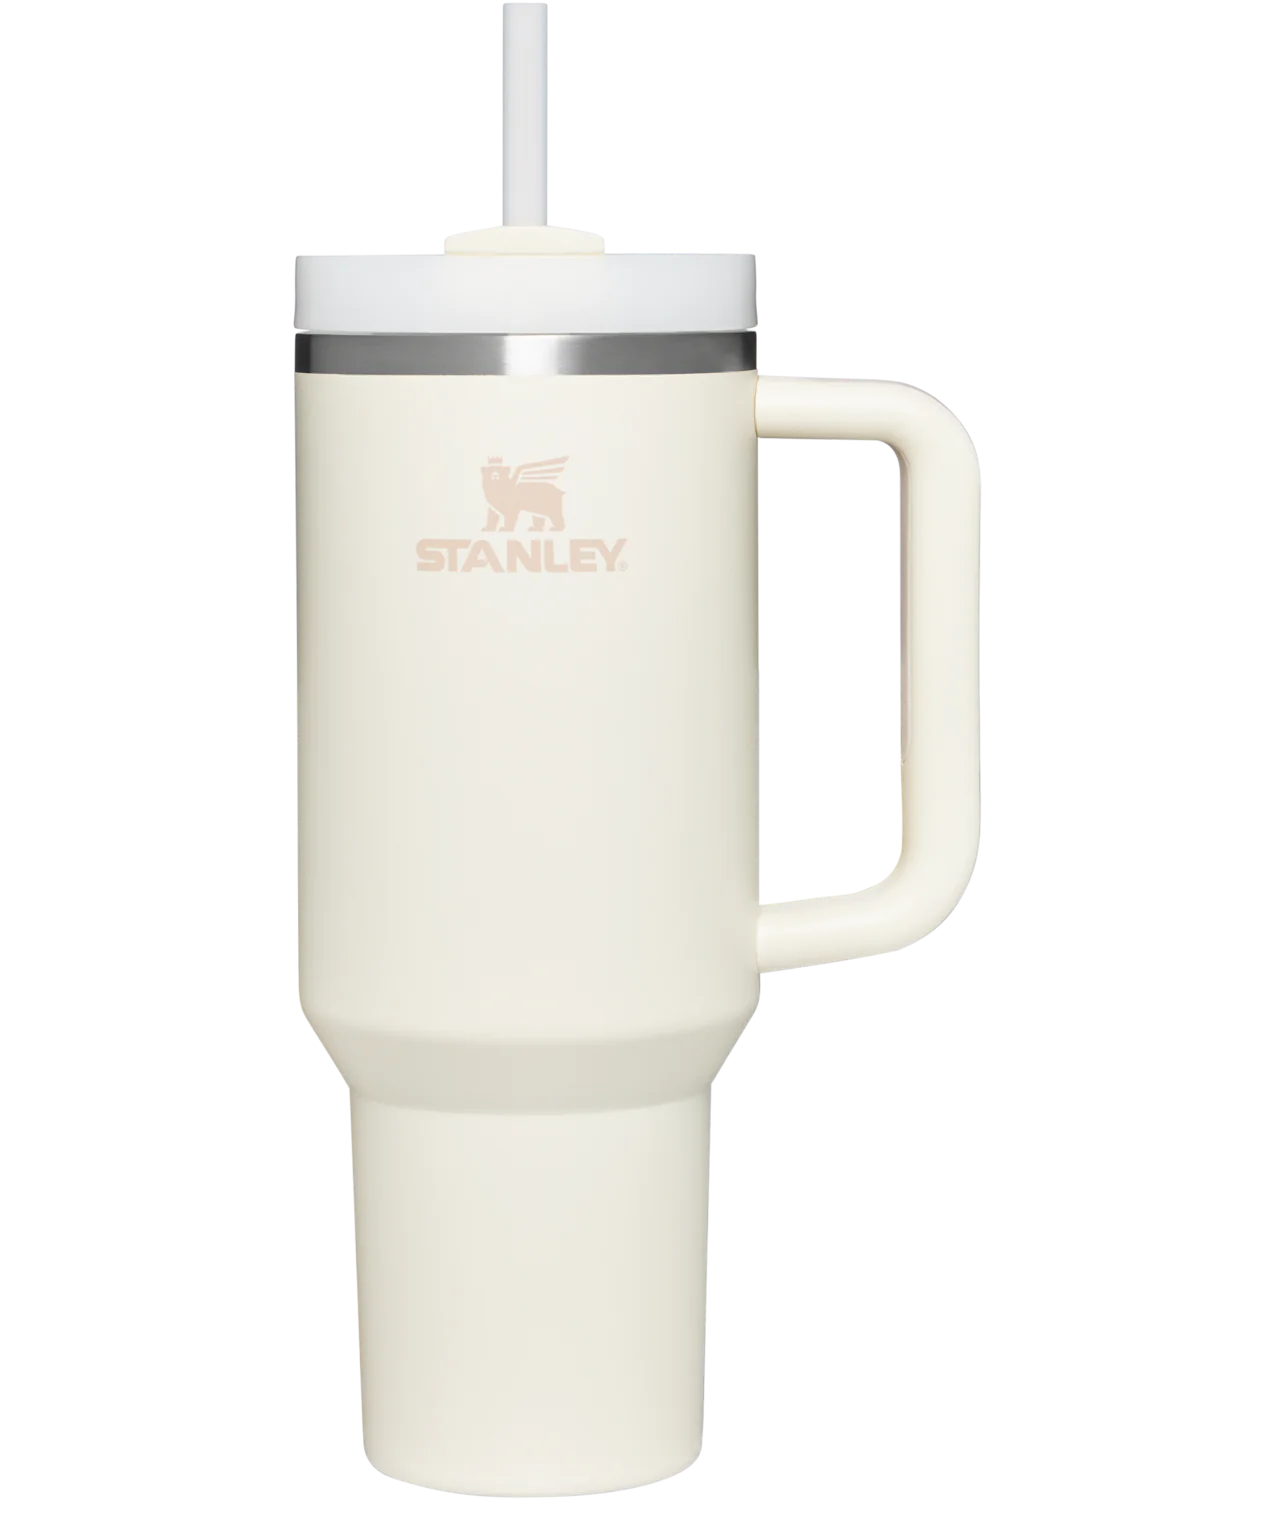 Stanley Quencher H2.0 FlowState Tumbler 40oz - Brilliant White for